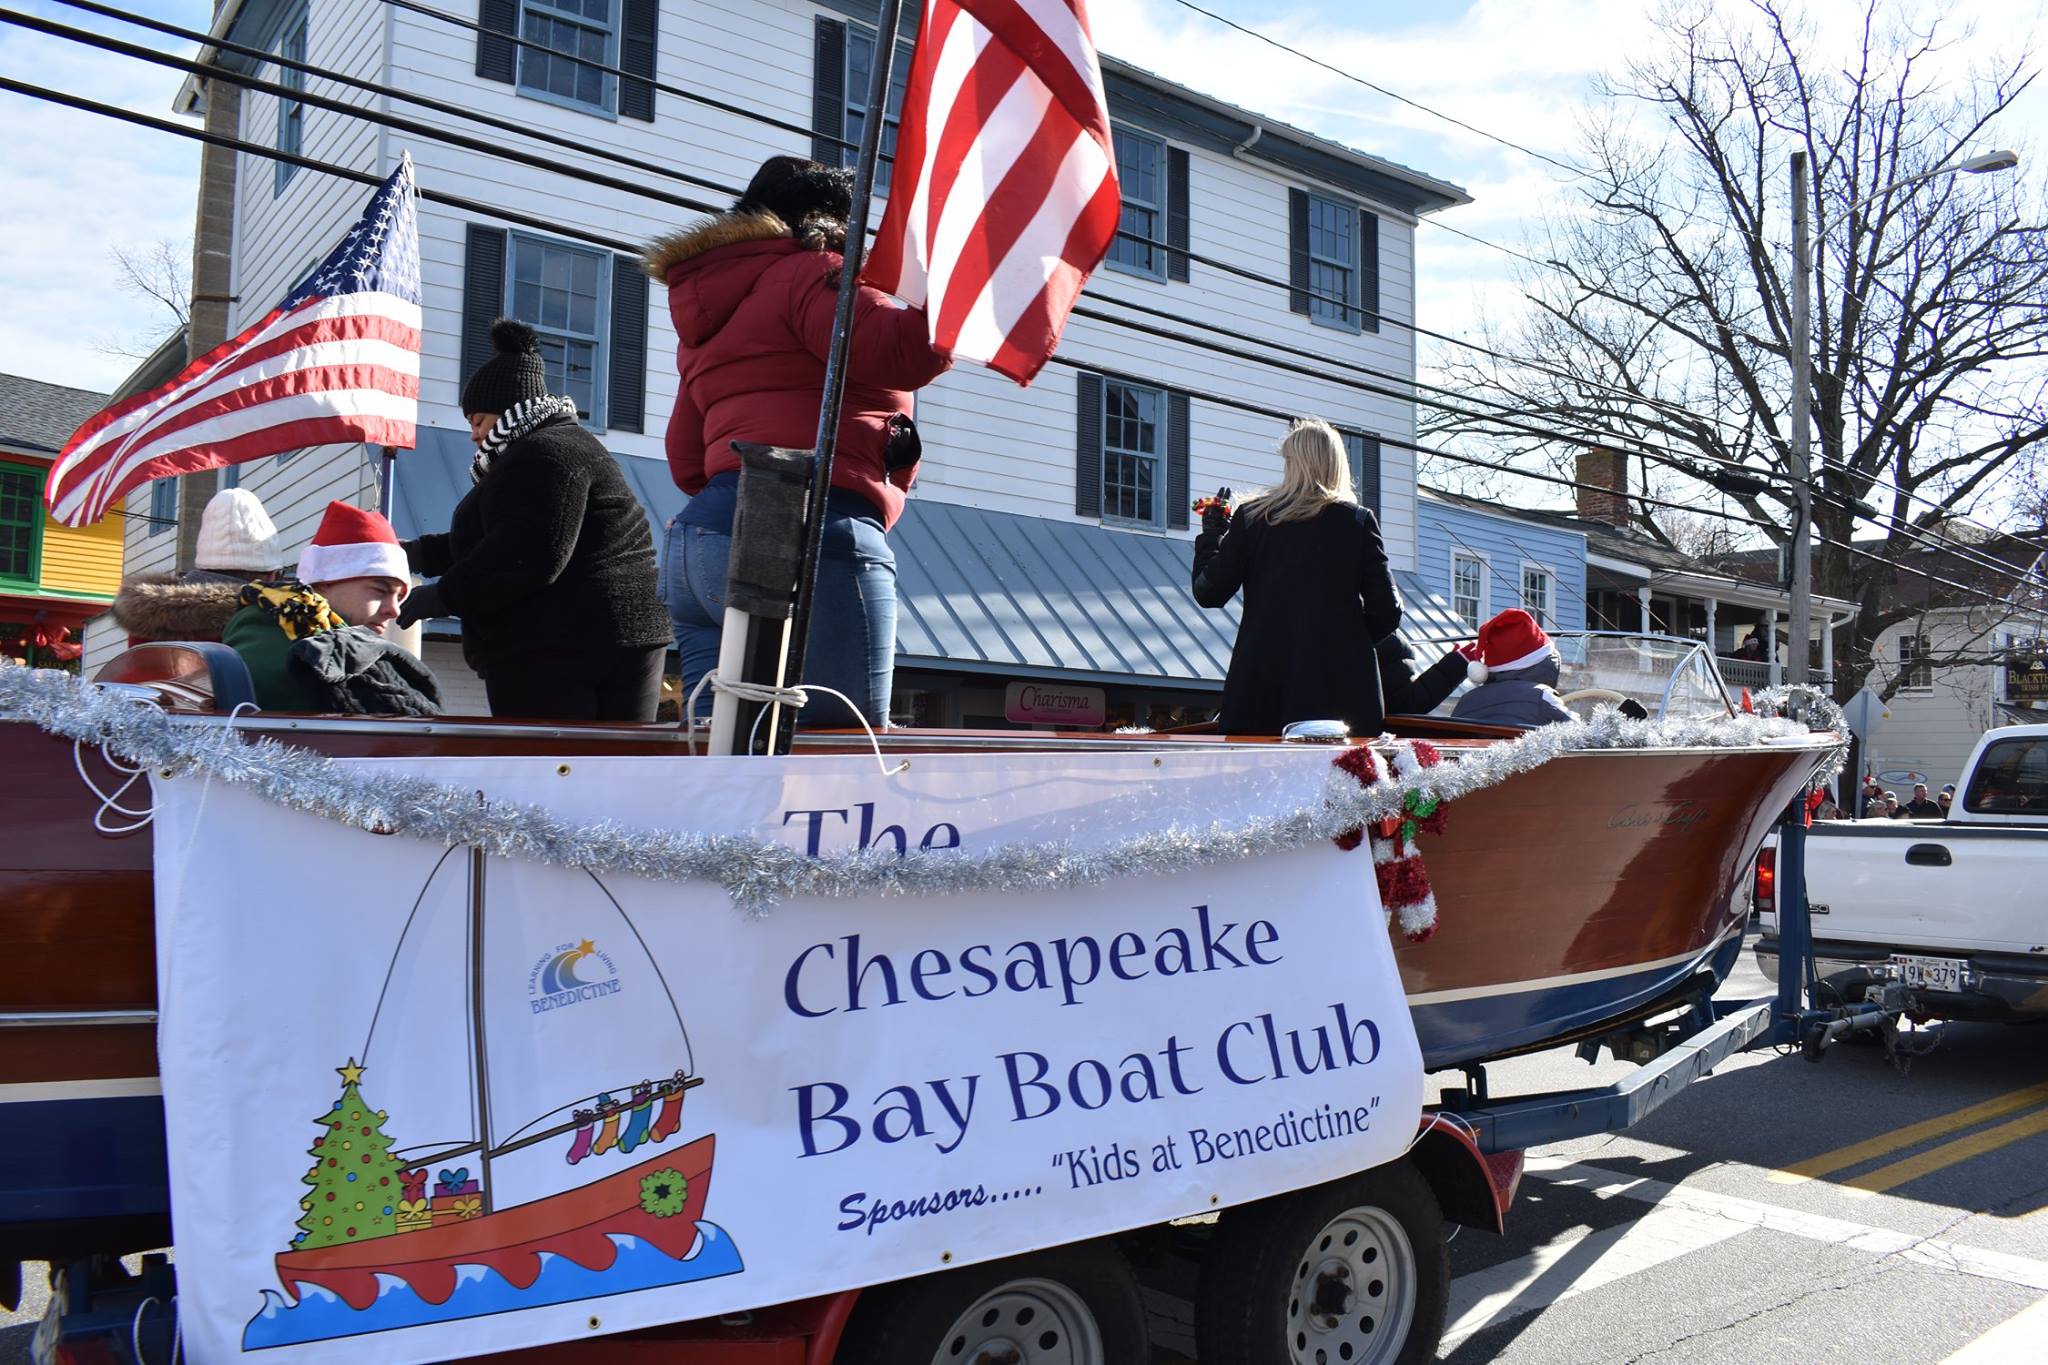 Boat on trailer in parade with Chesapeake Bay Boat Club banner.